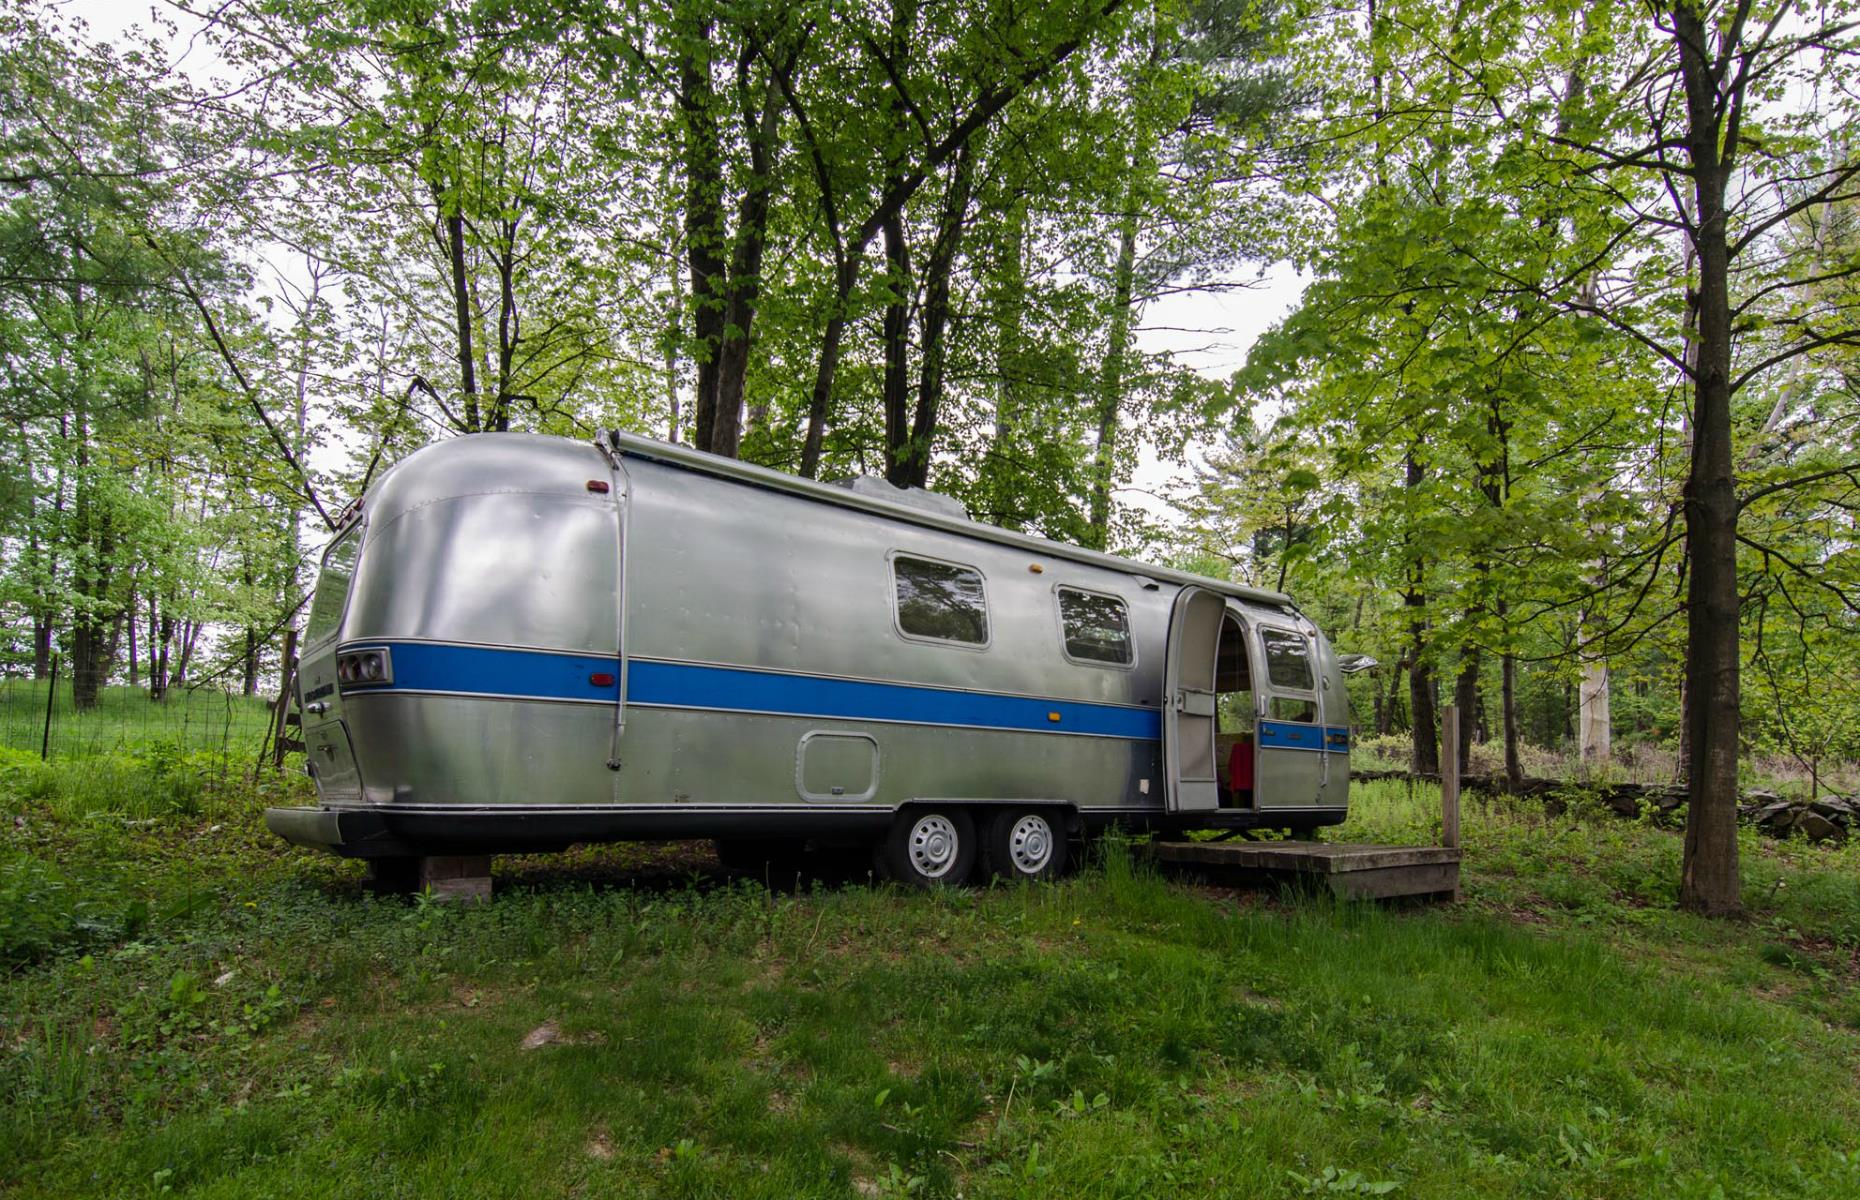 <p>The perfect location for a gathering, this delightful <a href="https://autocamp.com/location/catskills/accommodations/?_accommodations_type=airstreams">Airstream</a> camper sleeps four, plus there’s space for an additional 16 people to sleep comfortably in the adjacent converted barn. It's set on a property with four acres of land, making it the ideal rural retreat.</p>